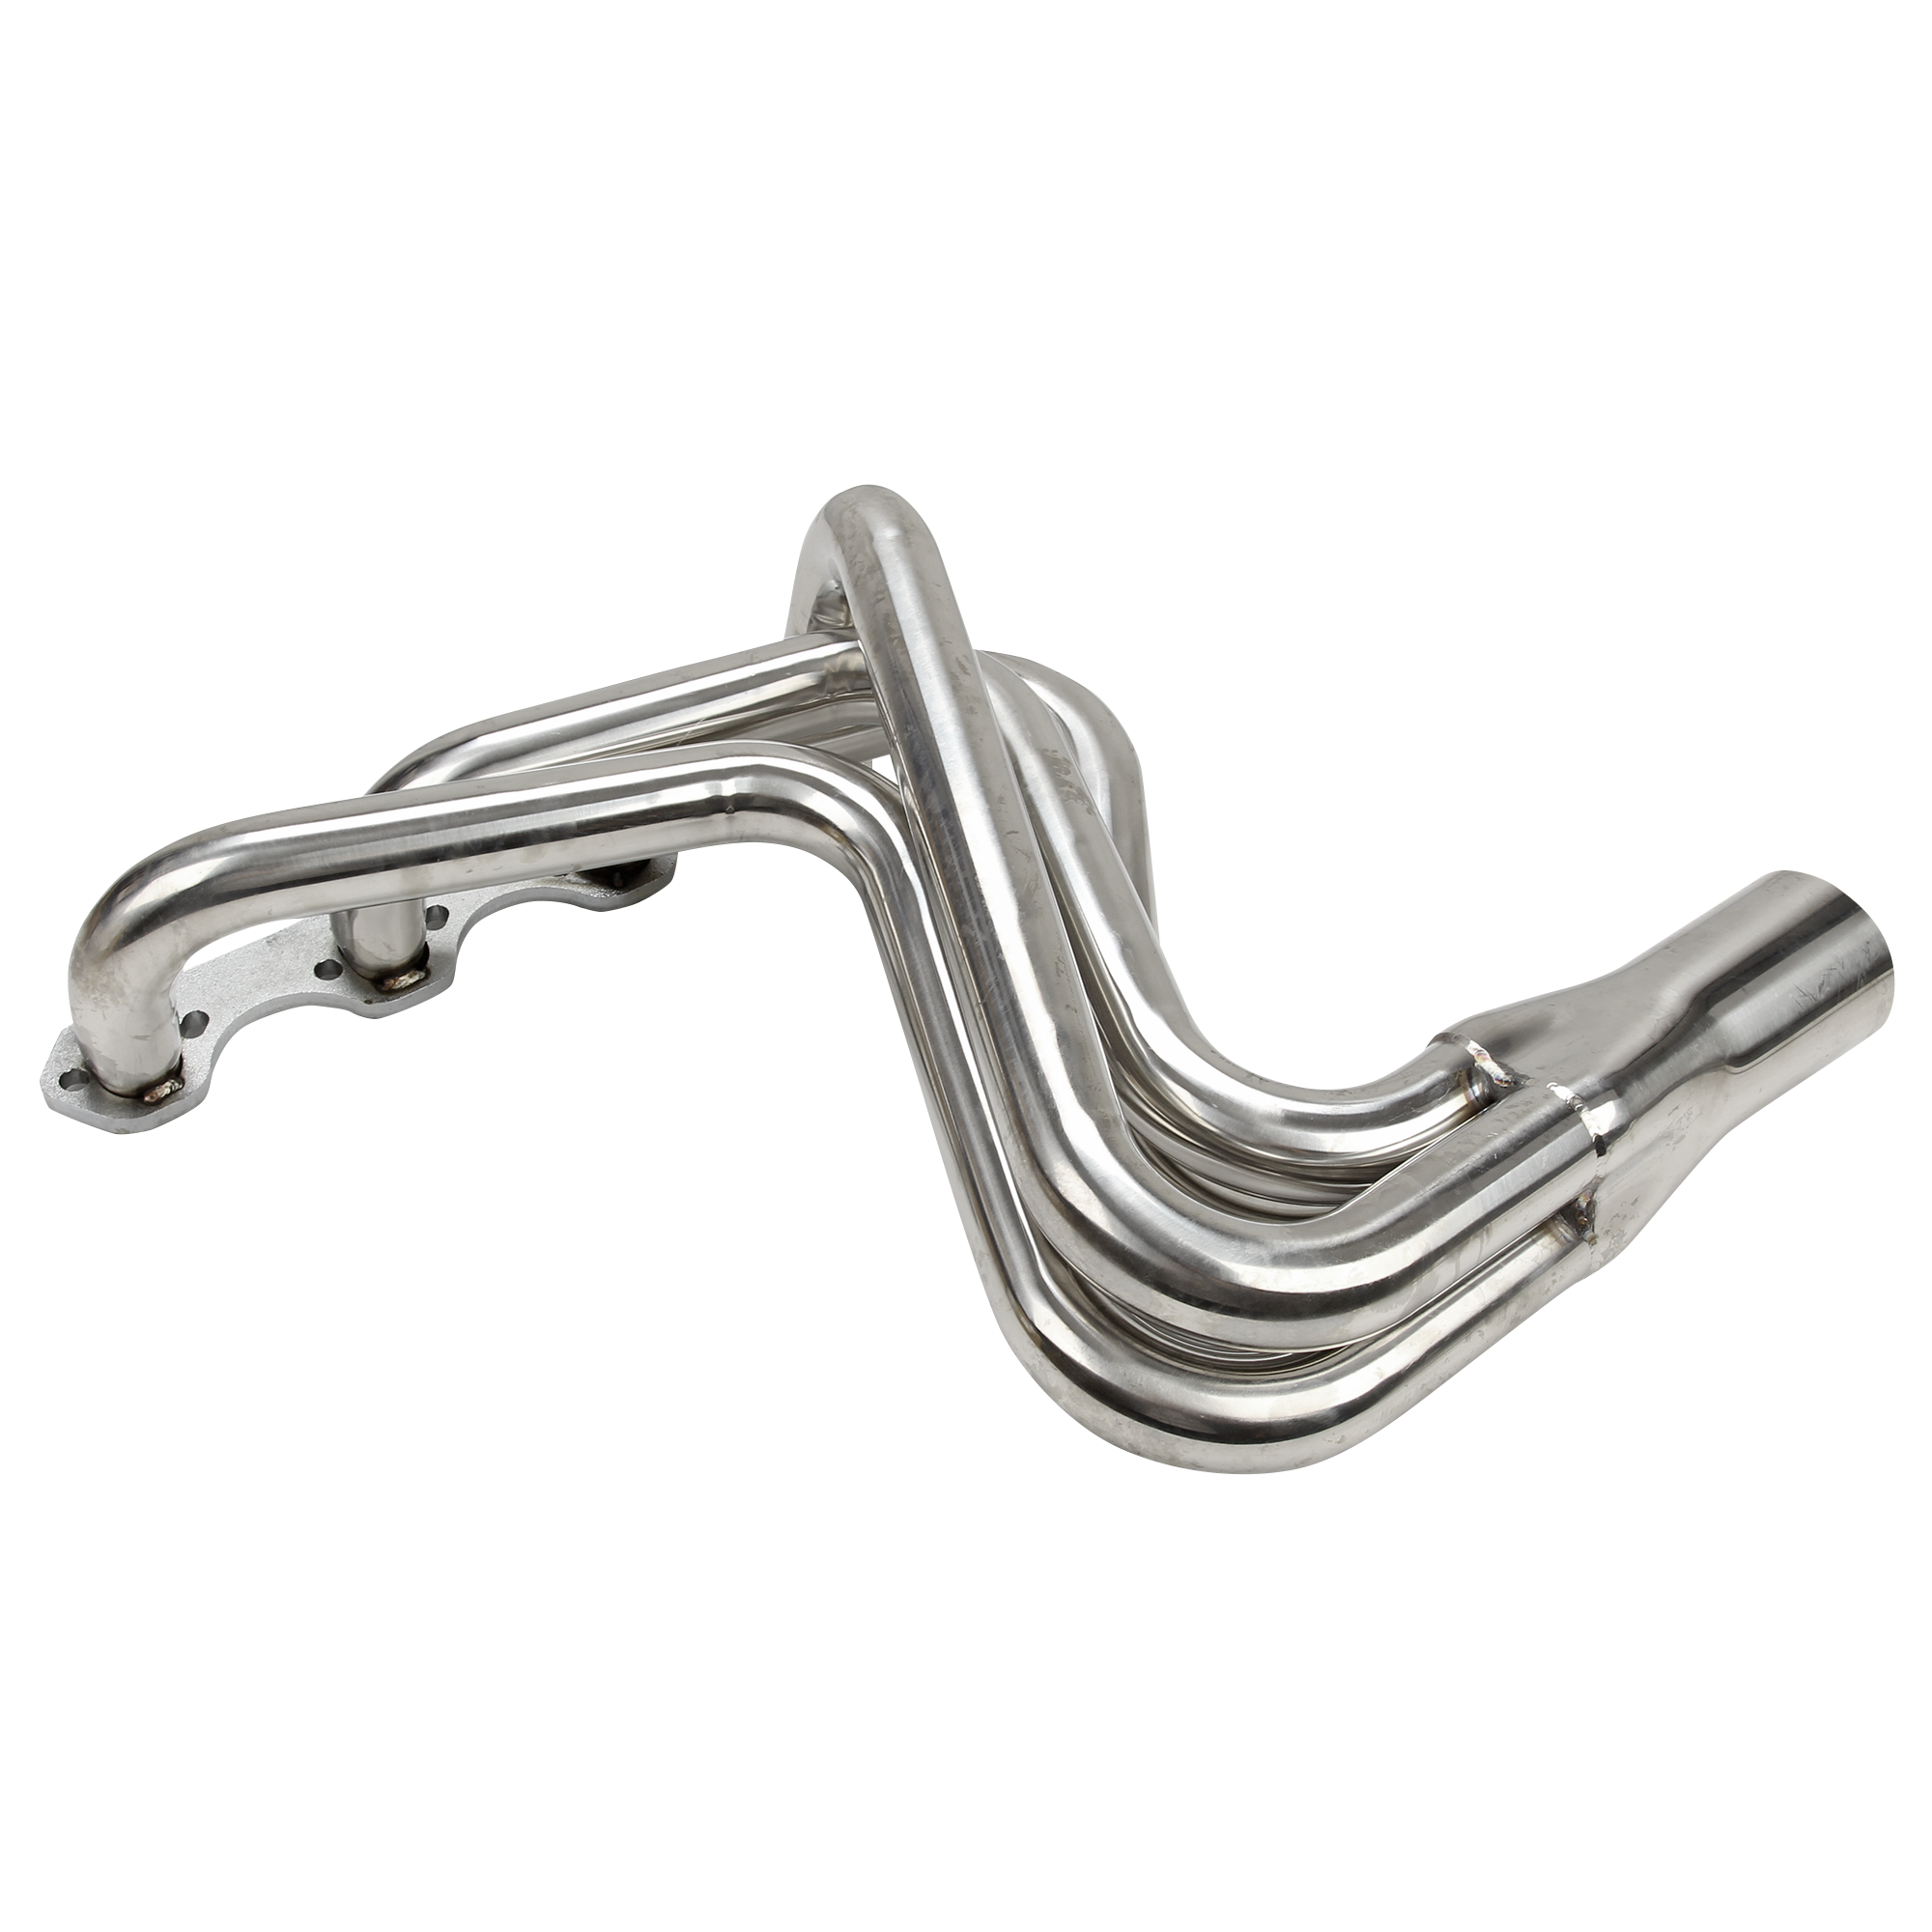 Racing SS Exhaust Header Manifold For 87-96 Ford F-150/f-250/Bronco Pickup 5.8l V8